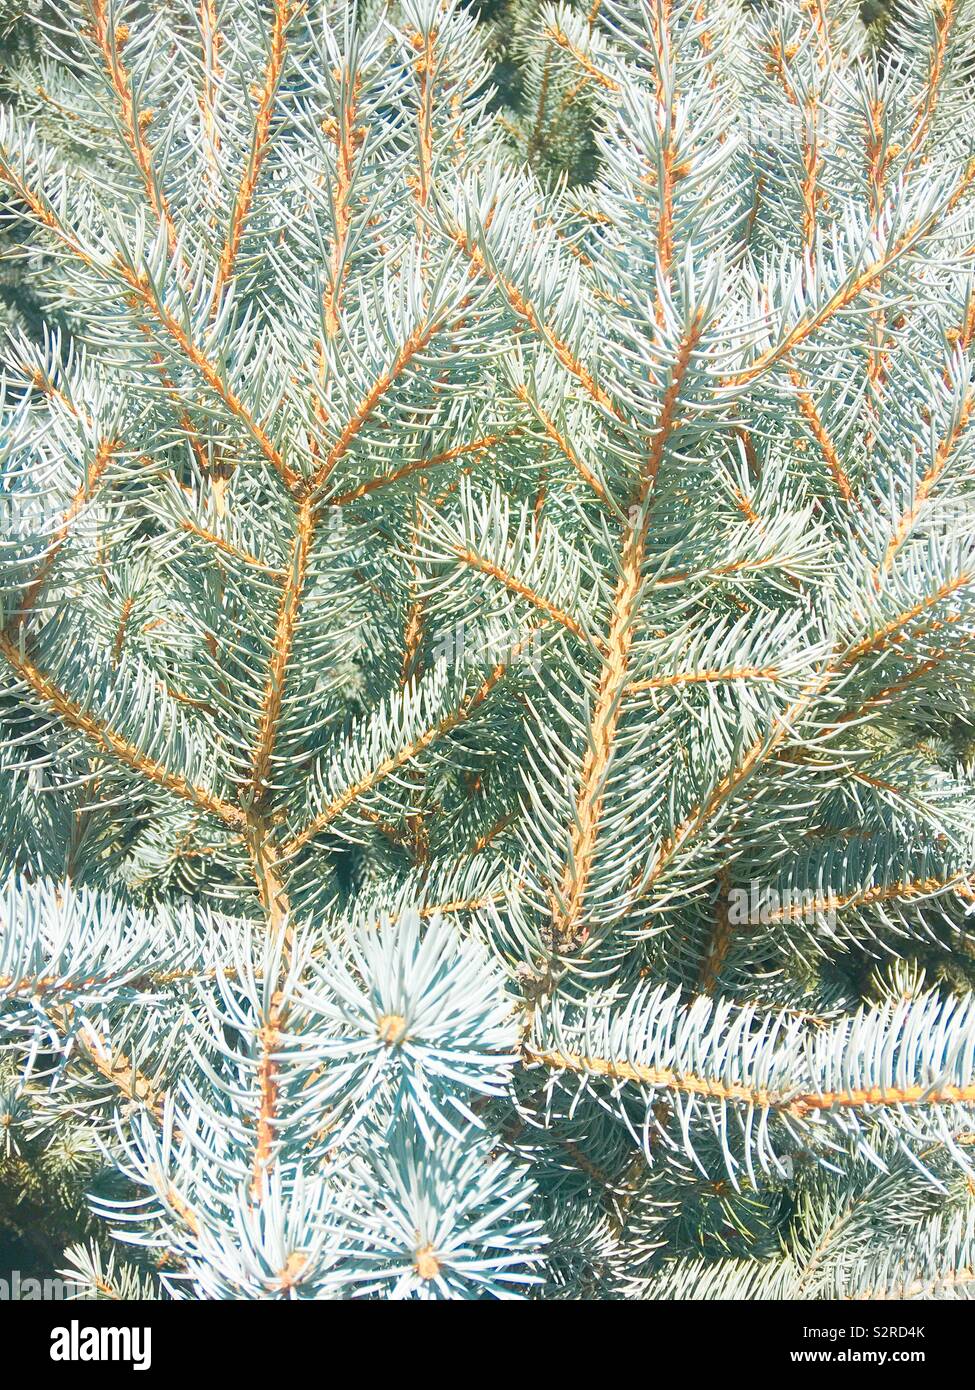 Blue spruce branches and needles. Close up nature background texture photograph. Stock Photo